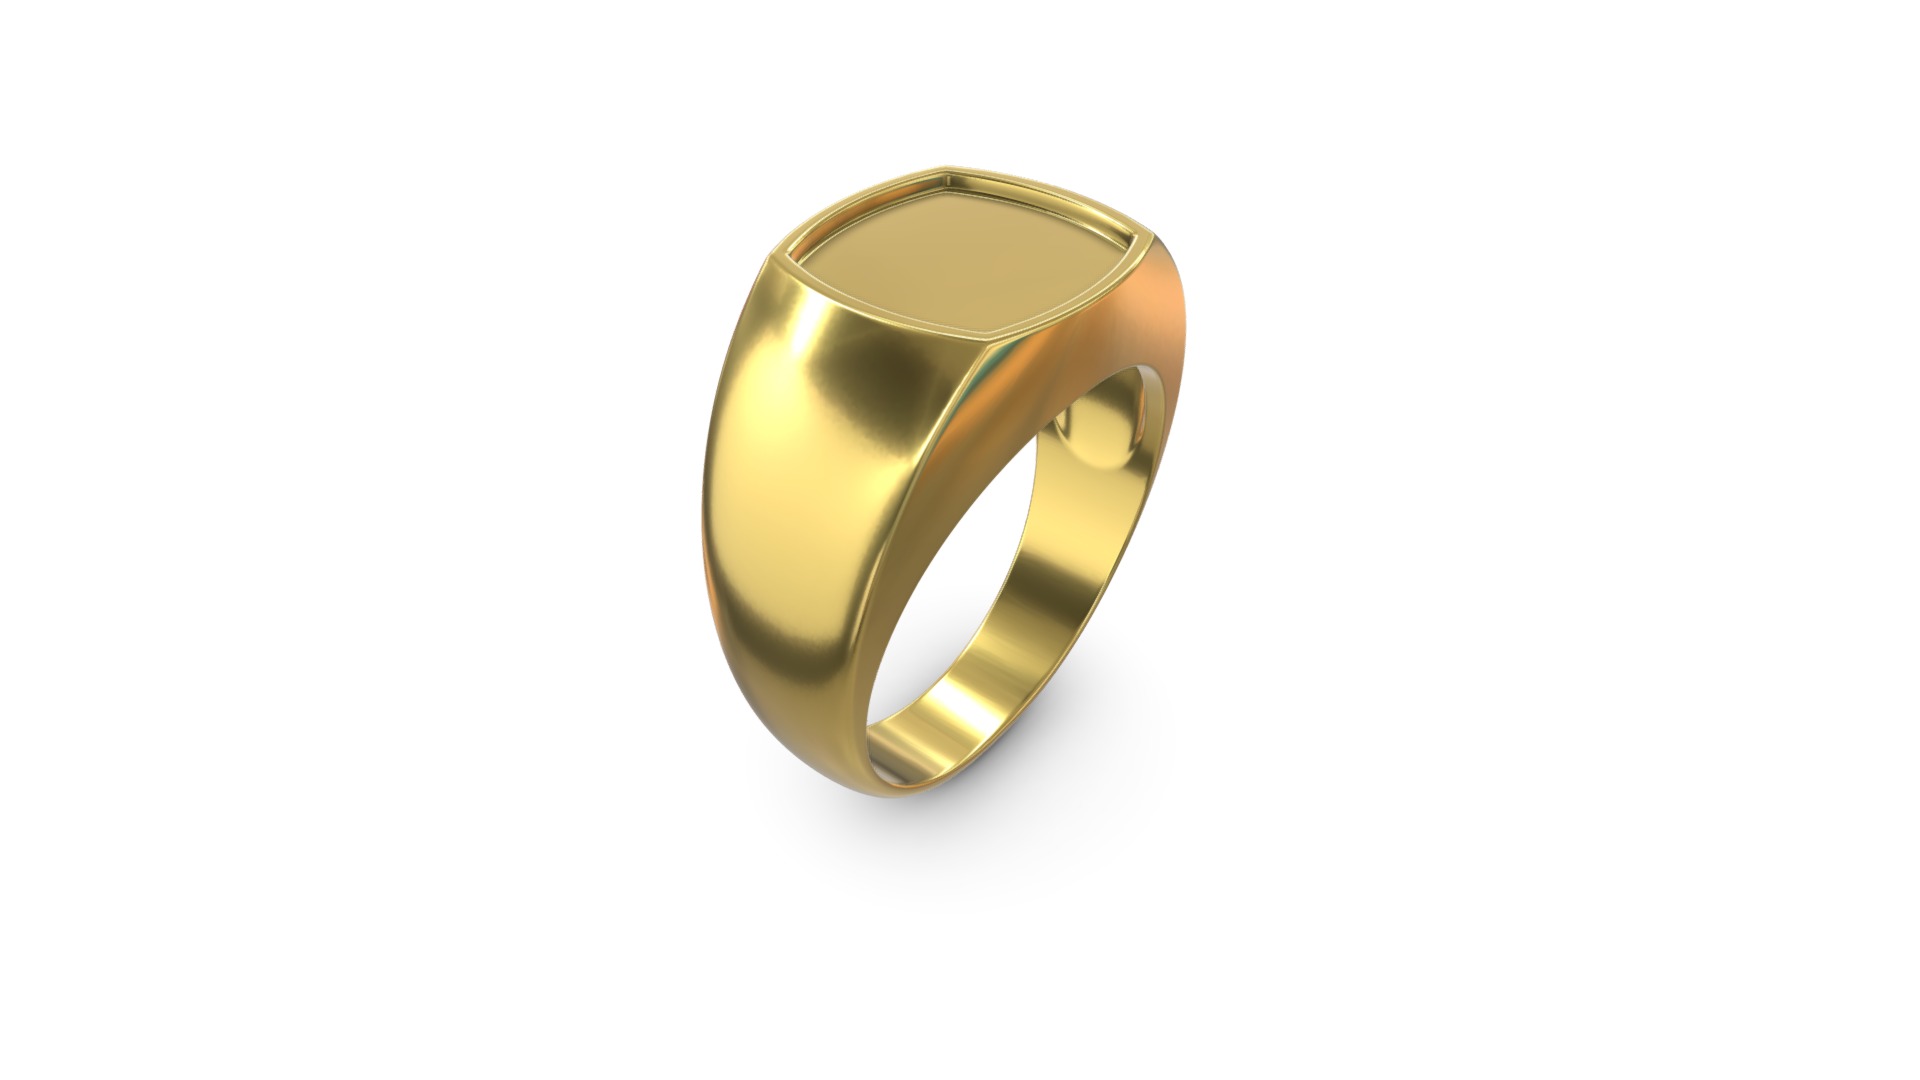 3D model Base Ring - This is a 3D model of the Base Ring. The 3D model is about a gold ring with a diamond.